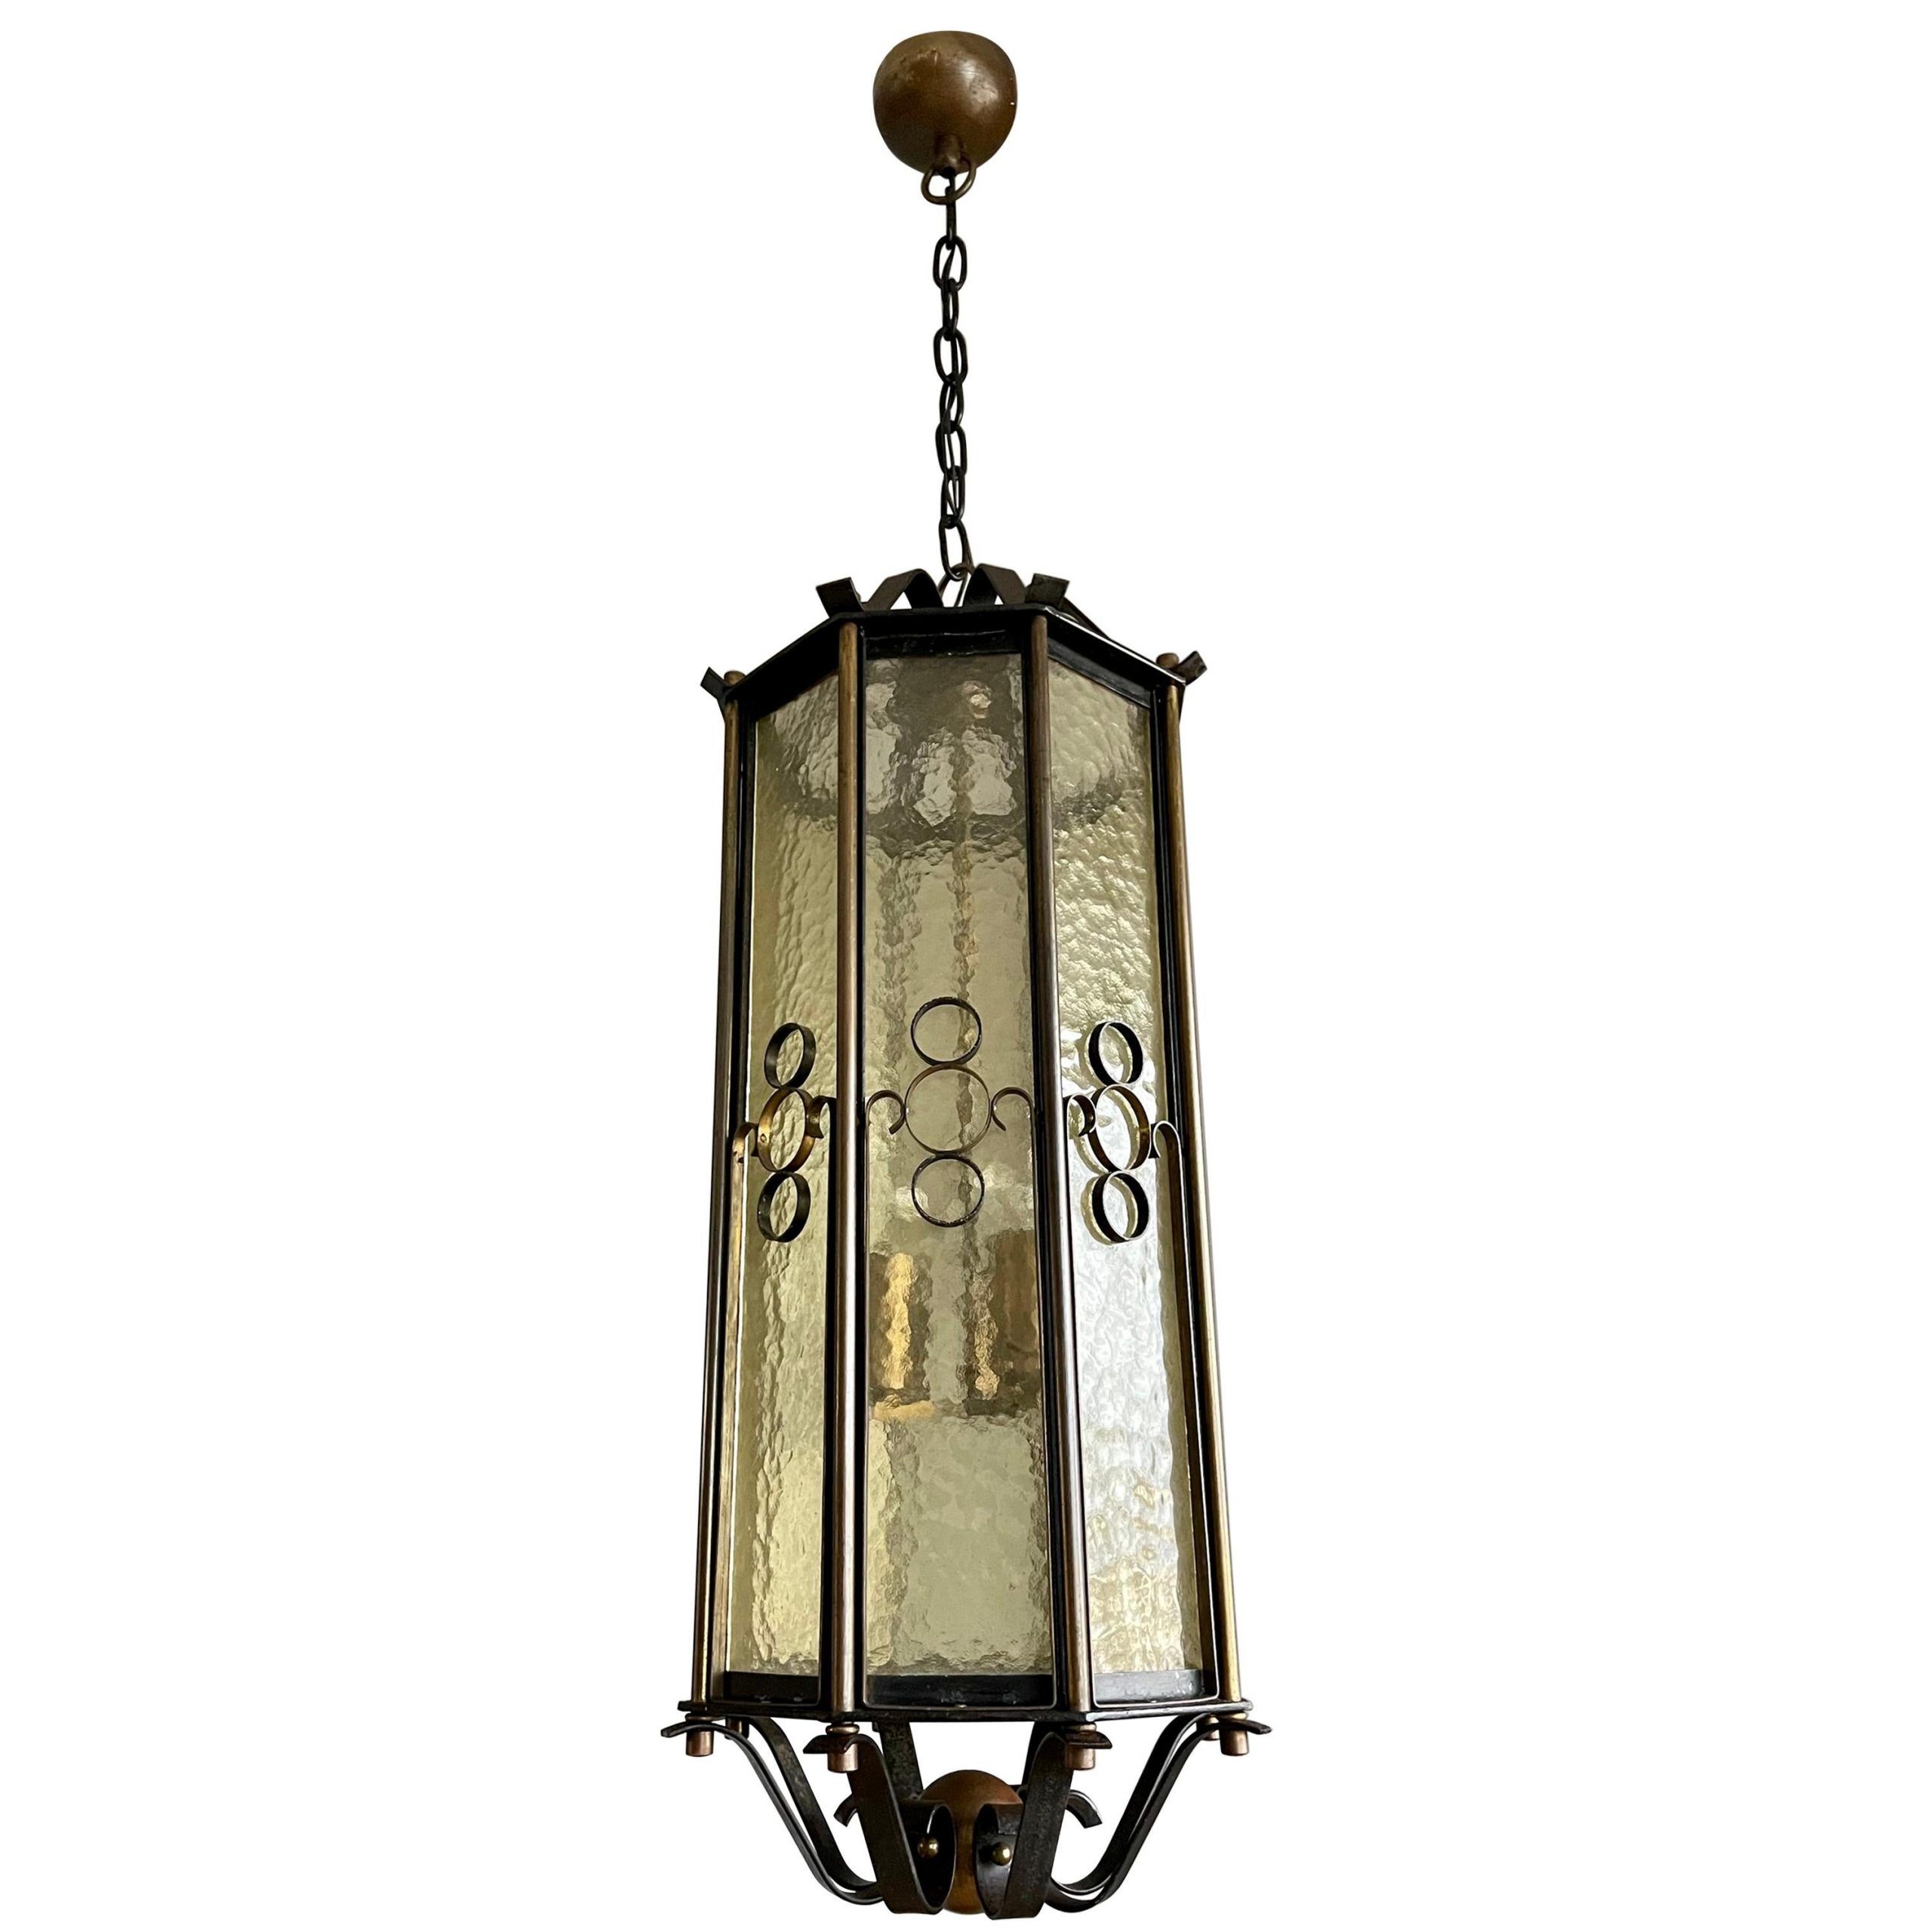 Extra Large Brass And Wrought Iron Lantern / Pendant With Cathedral Glass,  1930s For Sale At 1stdibs With Forged Iron Lantern Chandeliers (View 9 of 15)